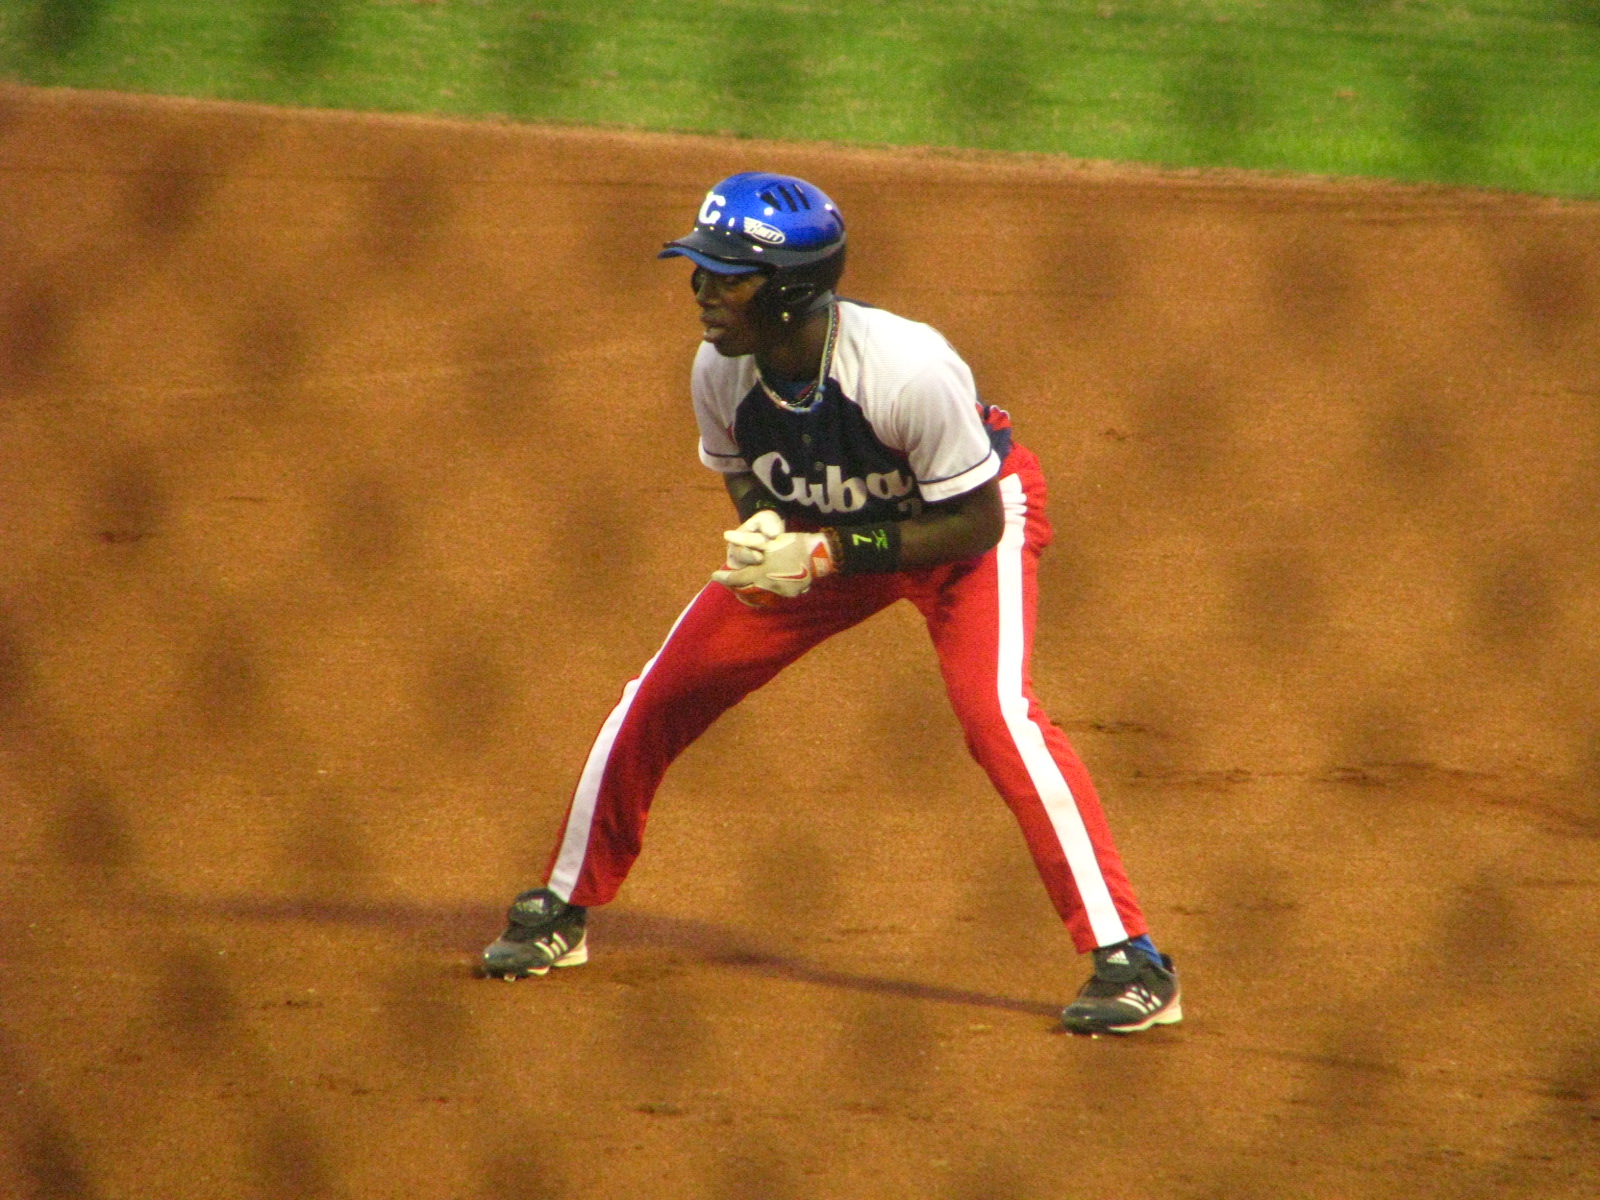 a baseball player standing on the base during a baseball game